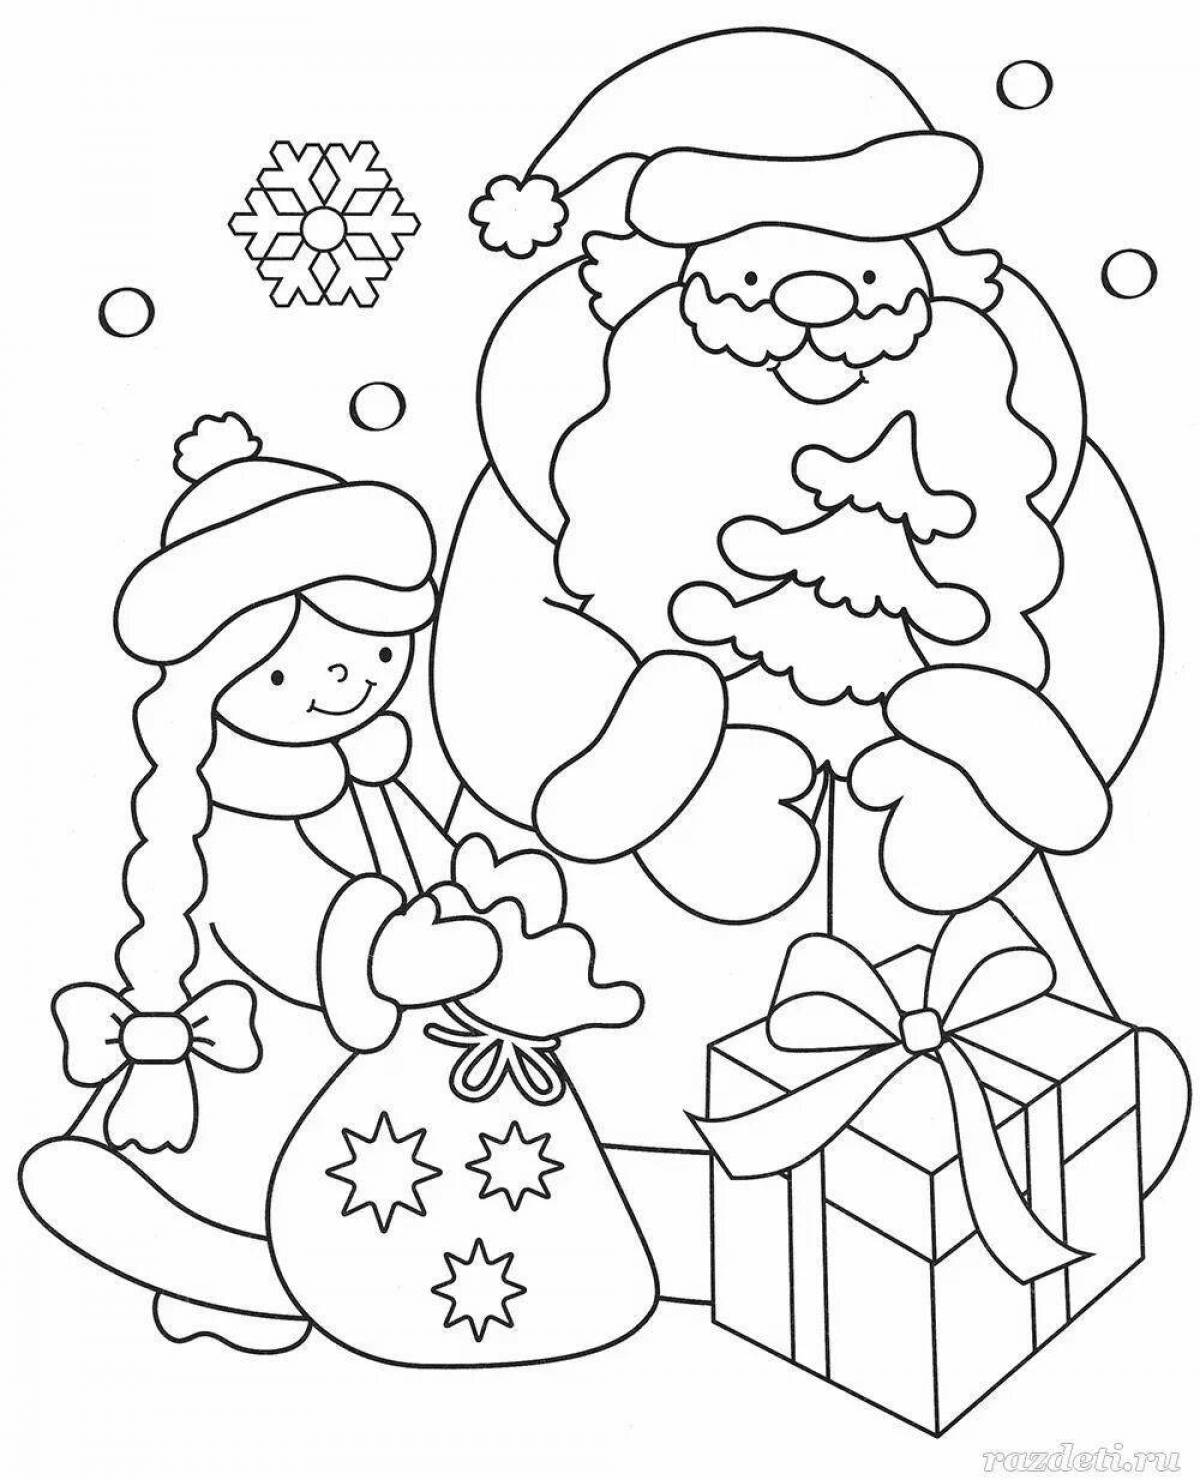 Exuberant Christmas coloring book for 5-6 year olds